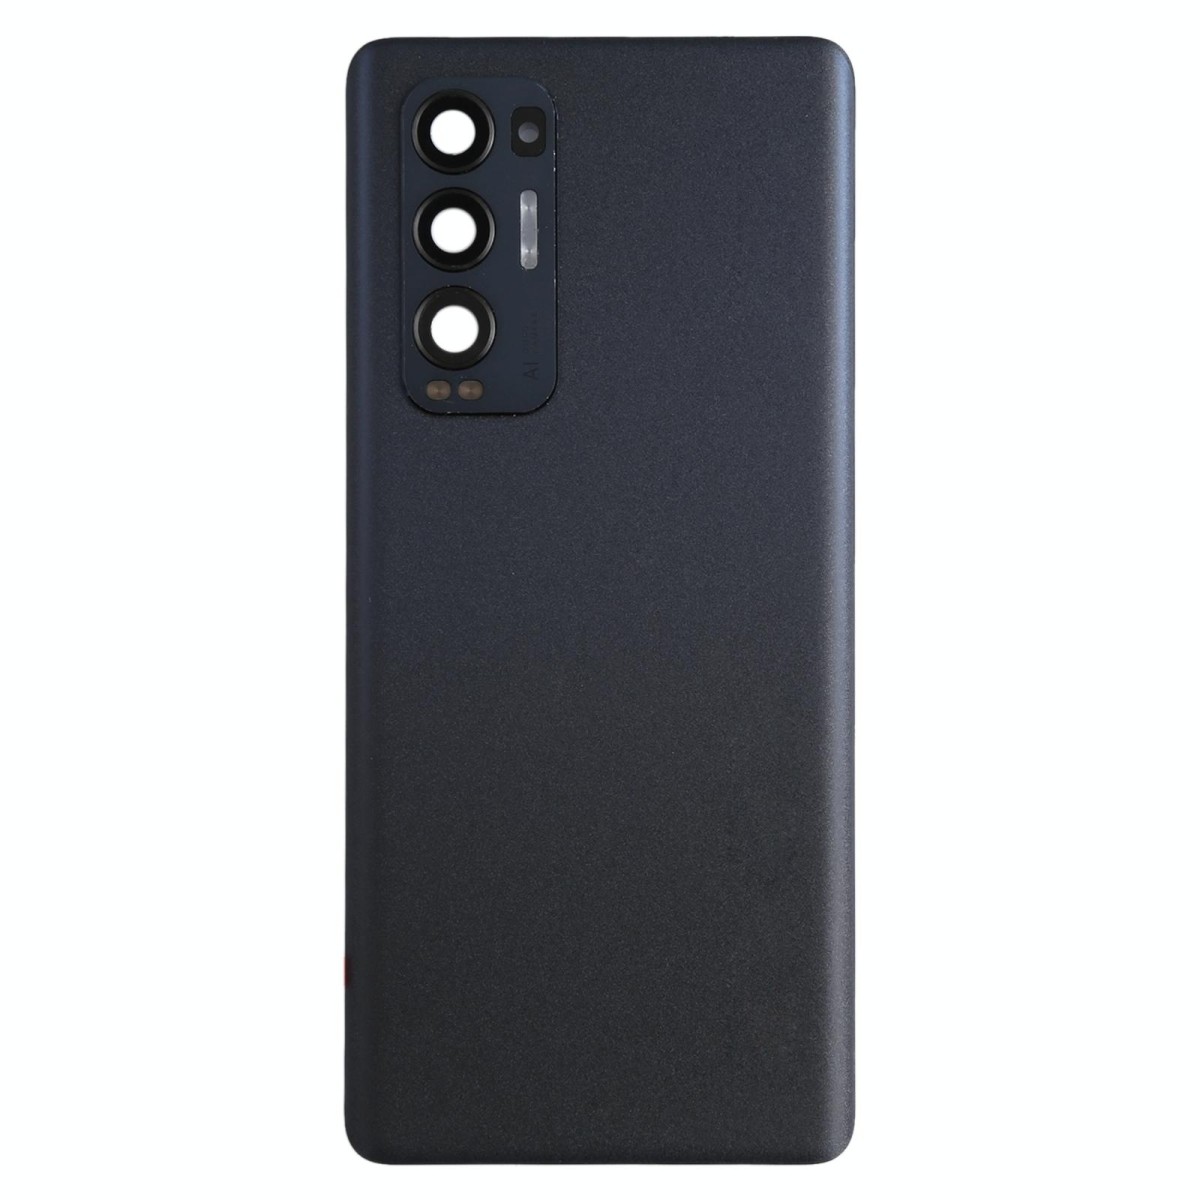 For OPPO Reno5 Pro+ 5G / Find X3 Neo CPH2207, PDRM00, PDRT00 Original Battery Back Cover (Black)